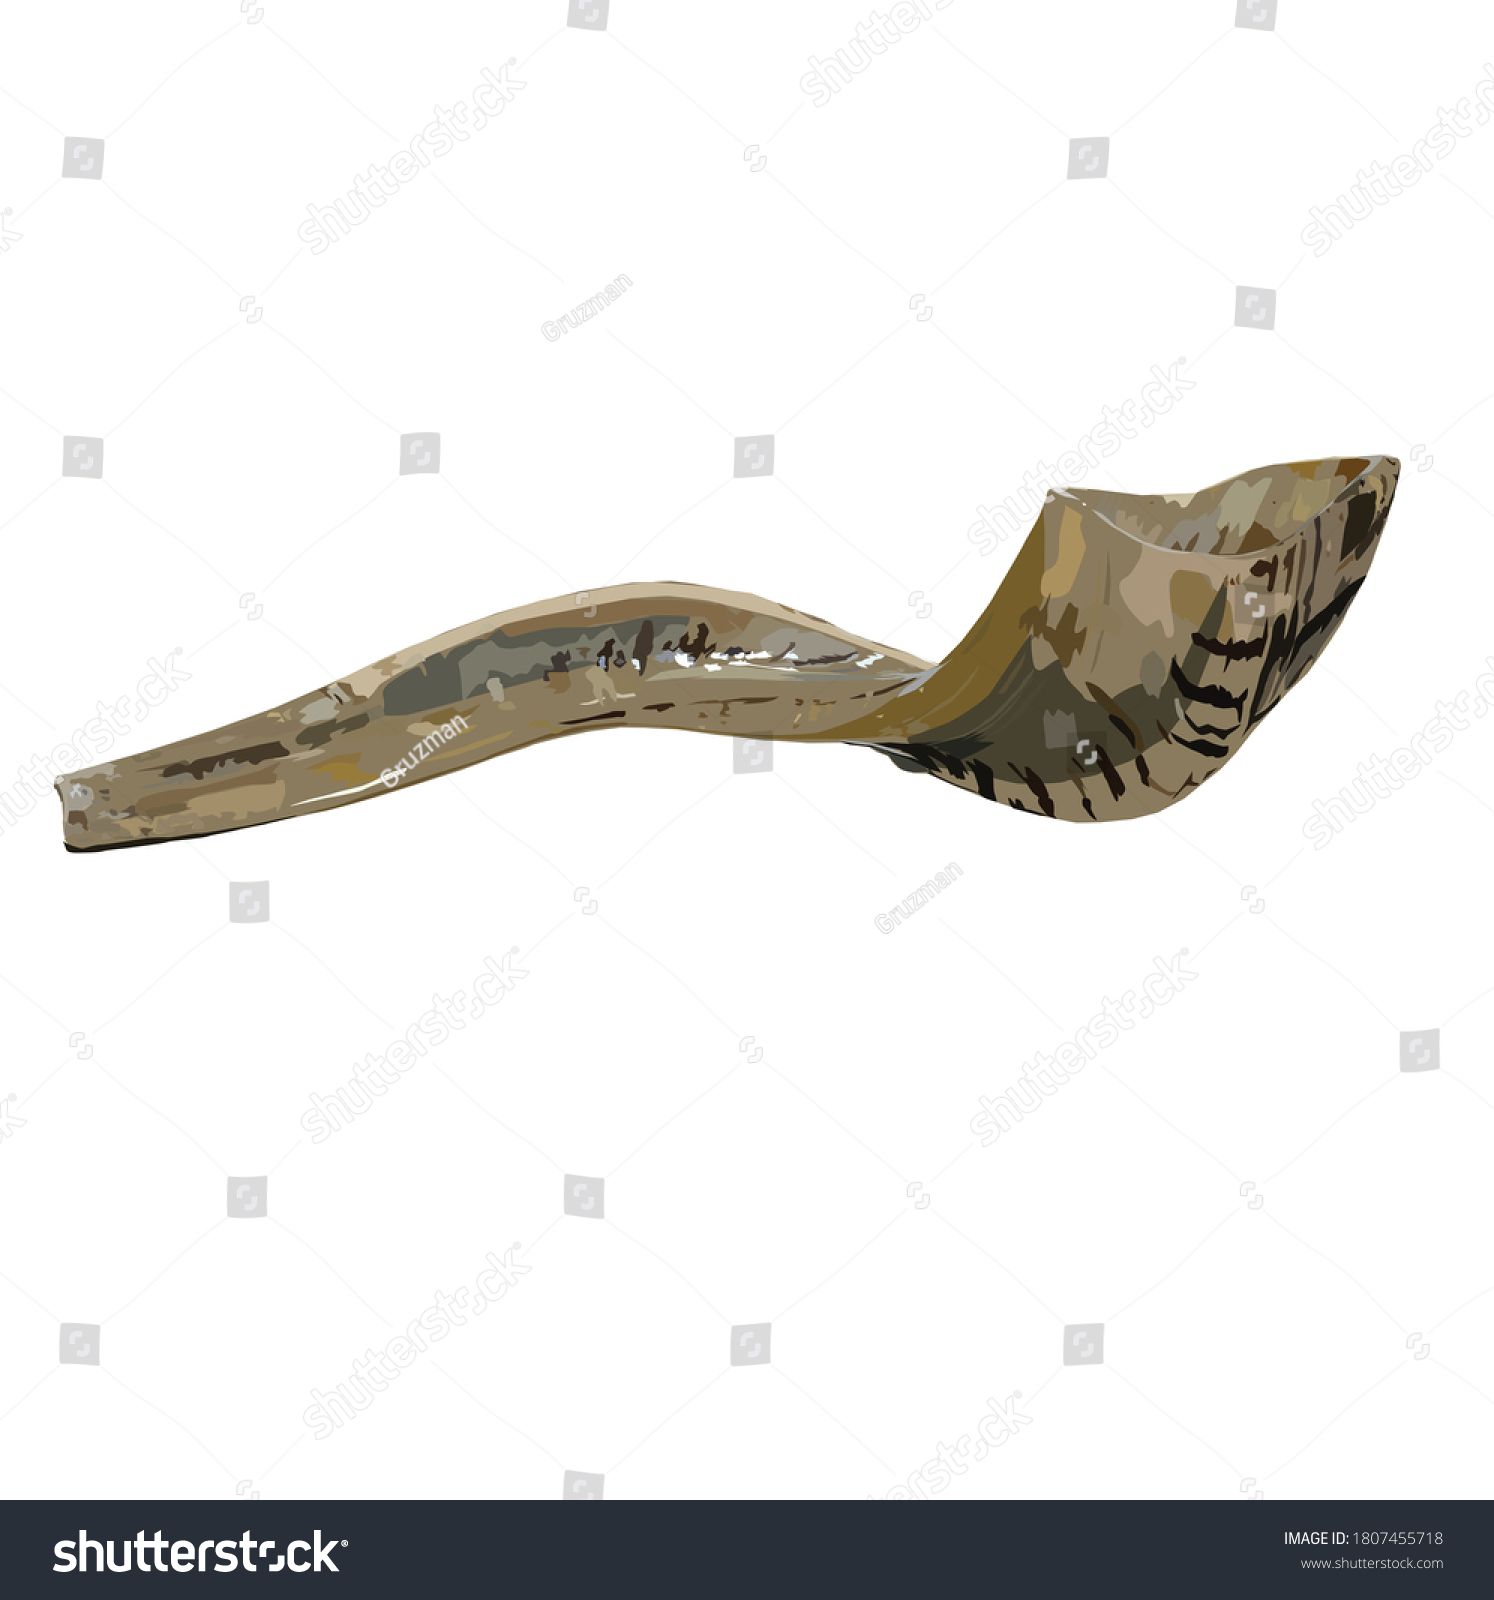 stock-vector-a-realistic-painting-of-a-shofar-an-ancient-musical-horn-typically-made-of-a-ram-...jpg